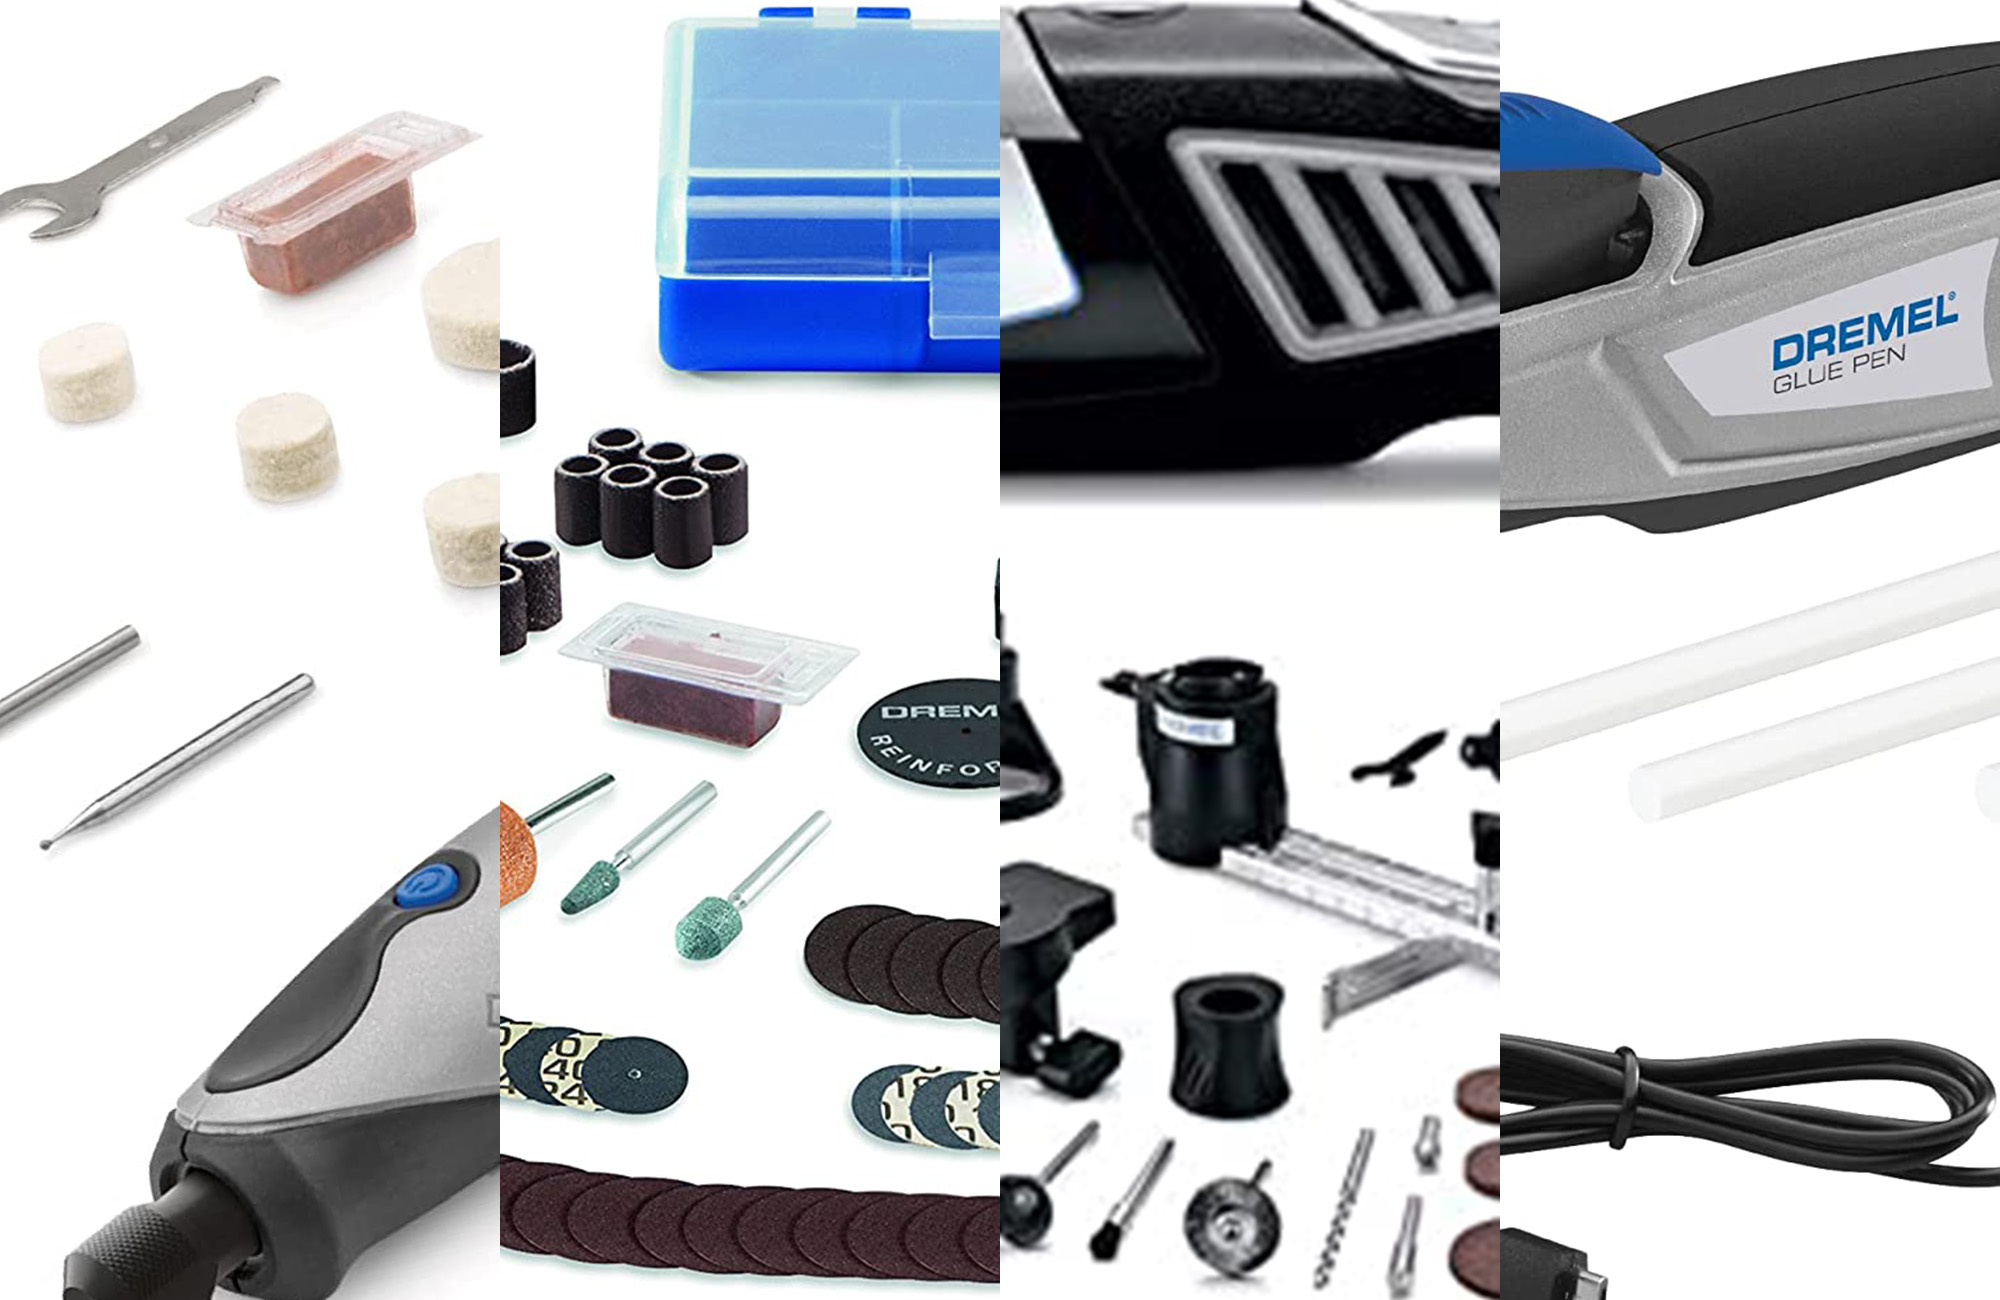 A lineup of Dremel products on a white background